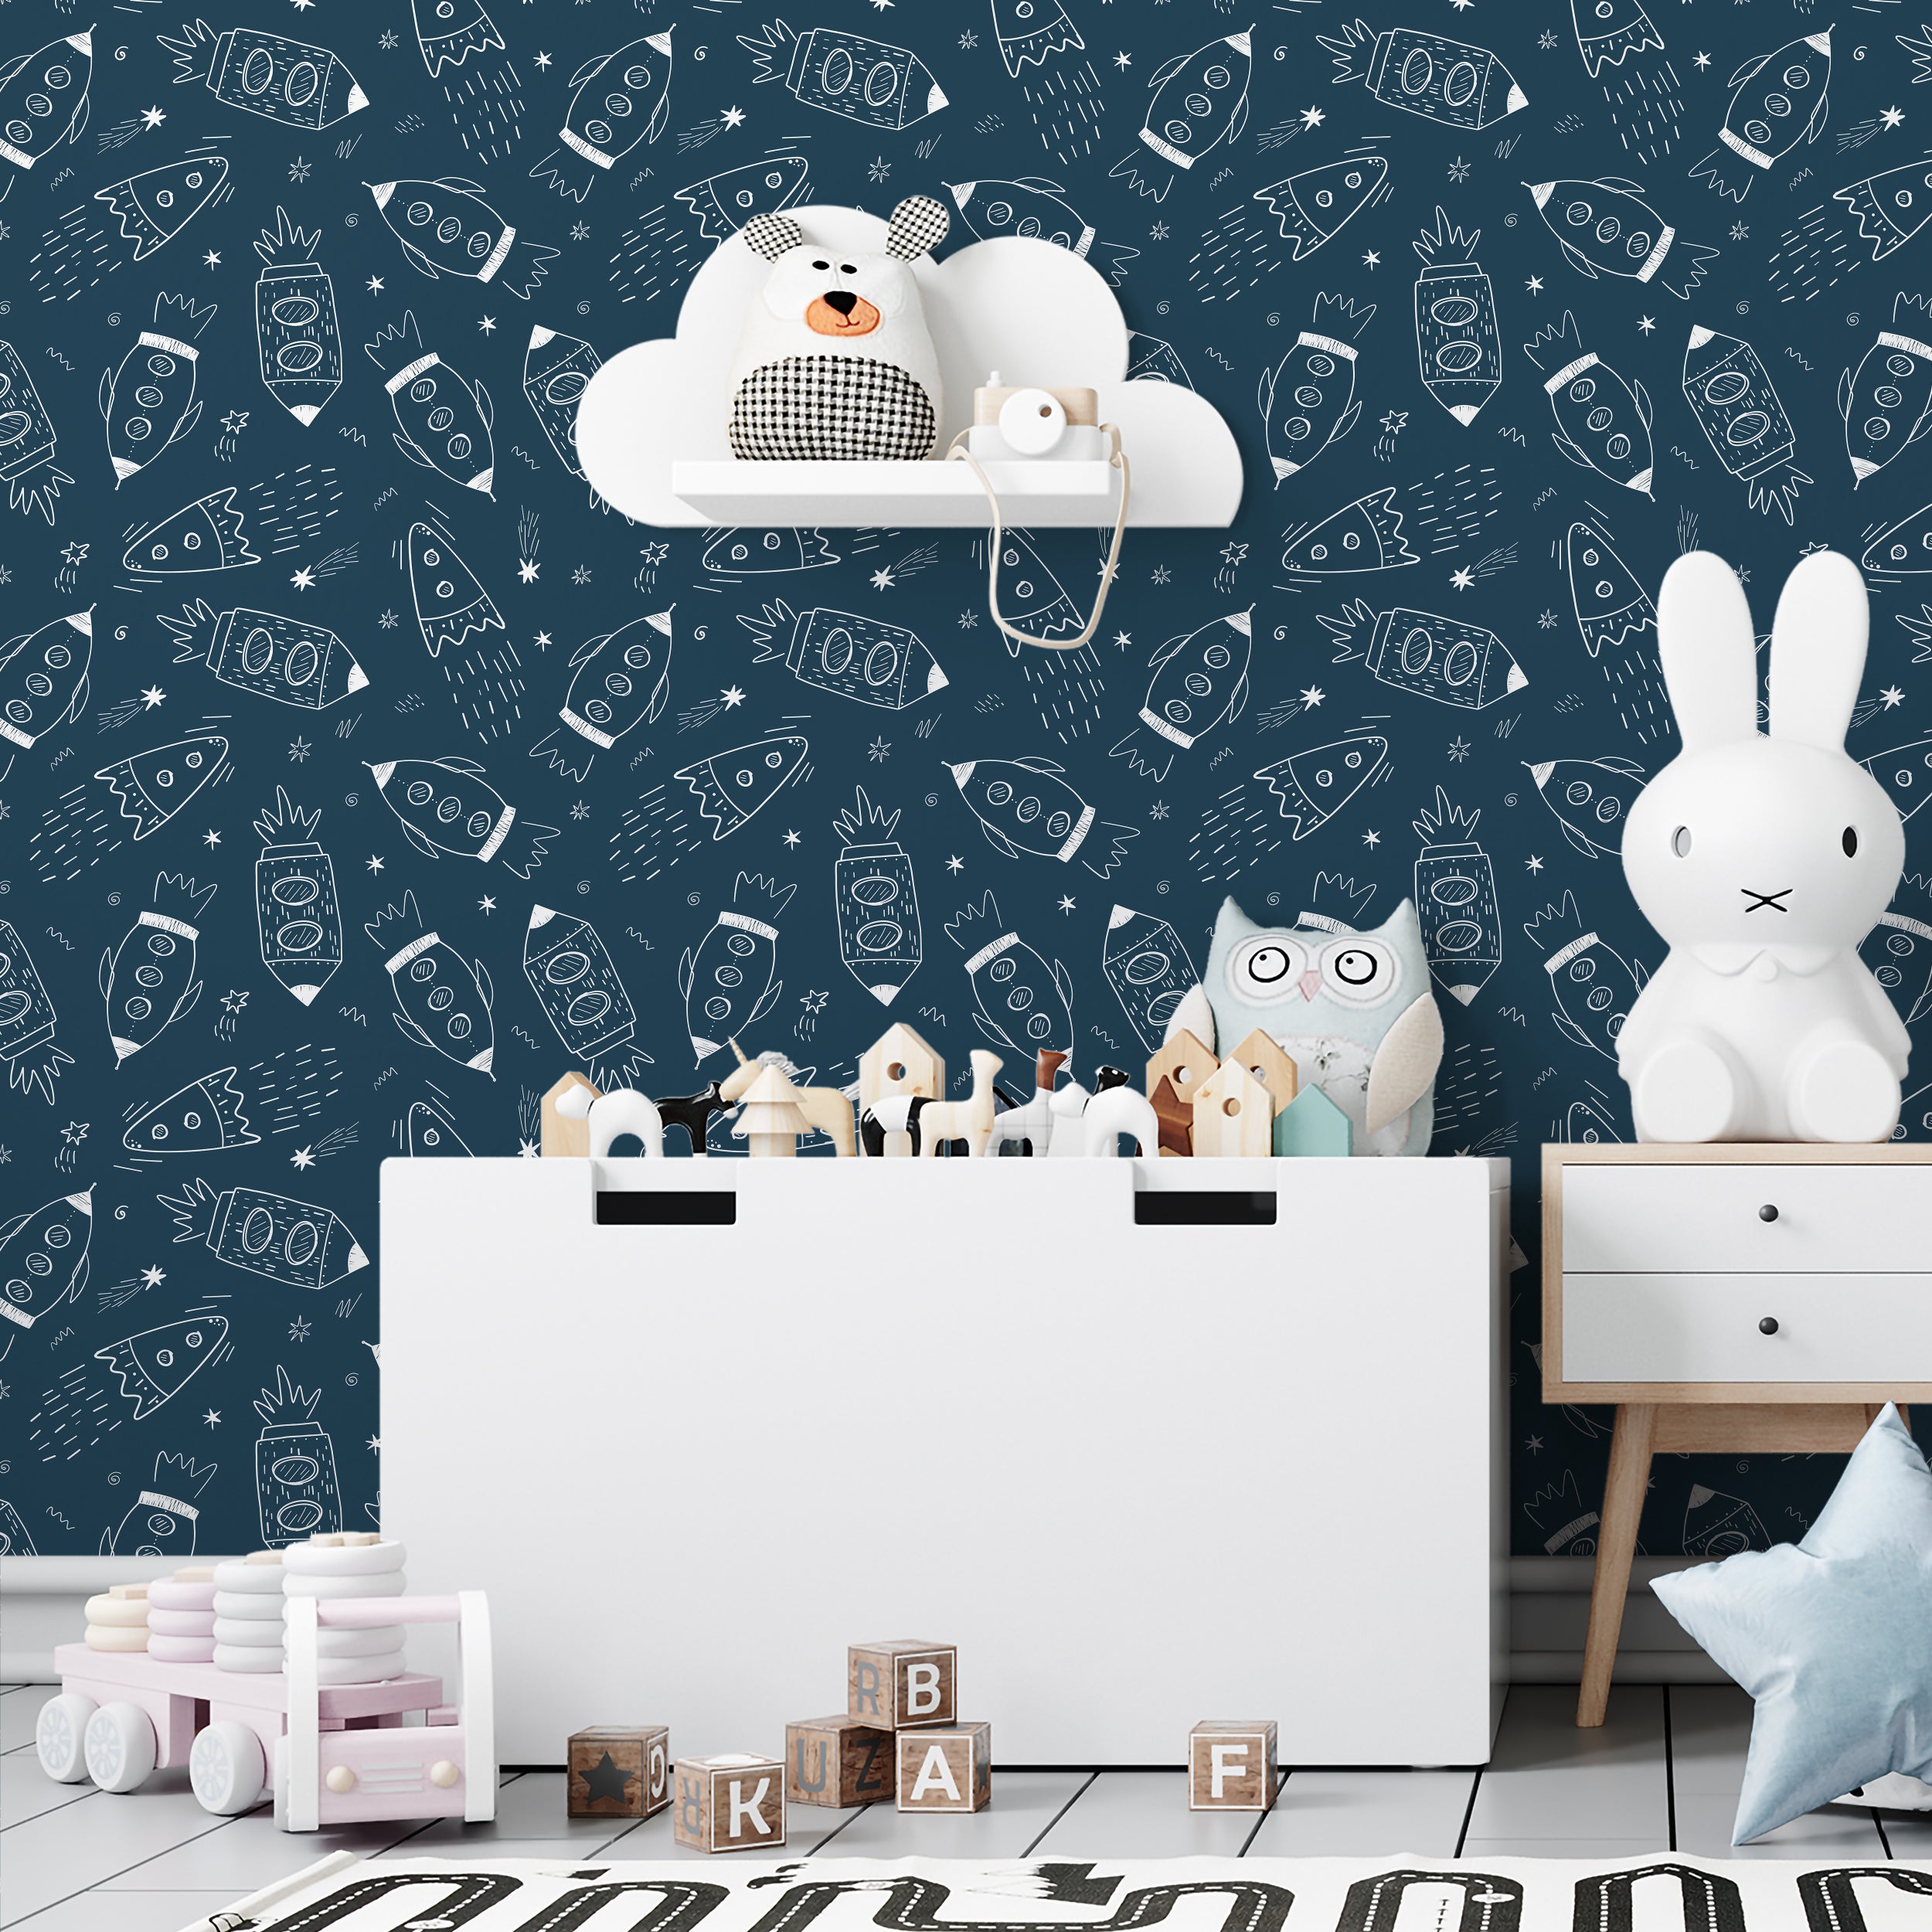 Children's room showcasing 'Cosmic Doodles' wallpaper with toy-stuffed cloud shelves and a playful mix of decor, evoking a fun space theme.